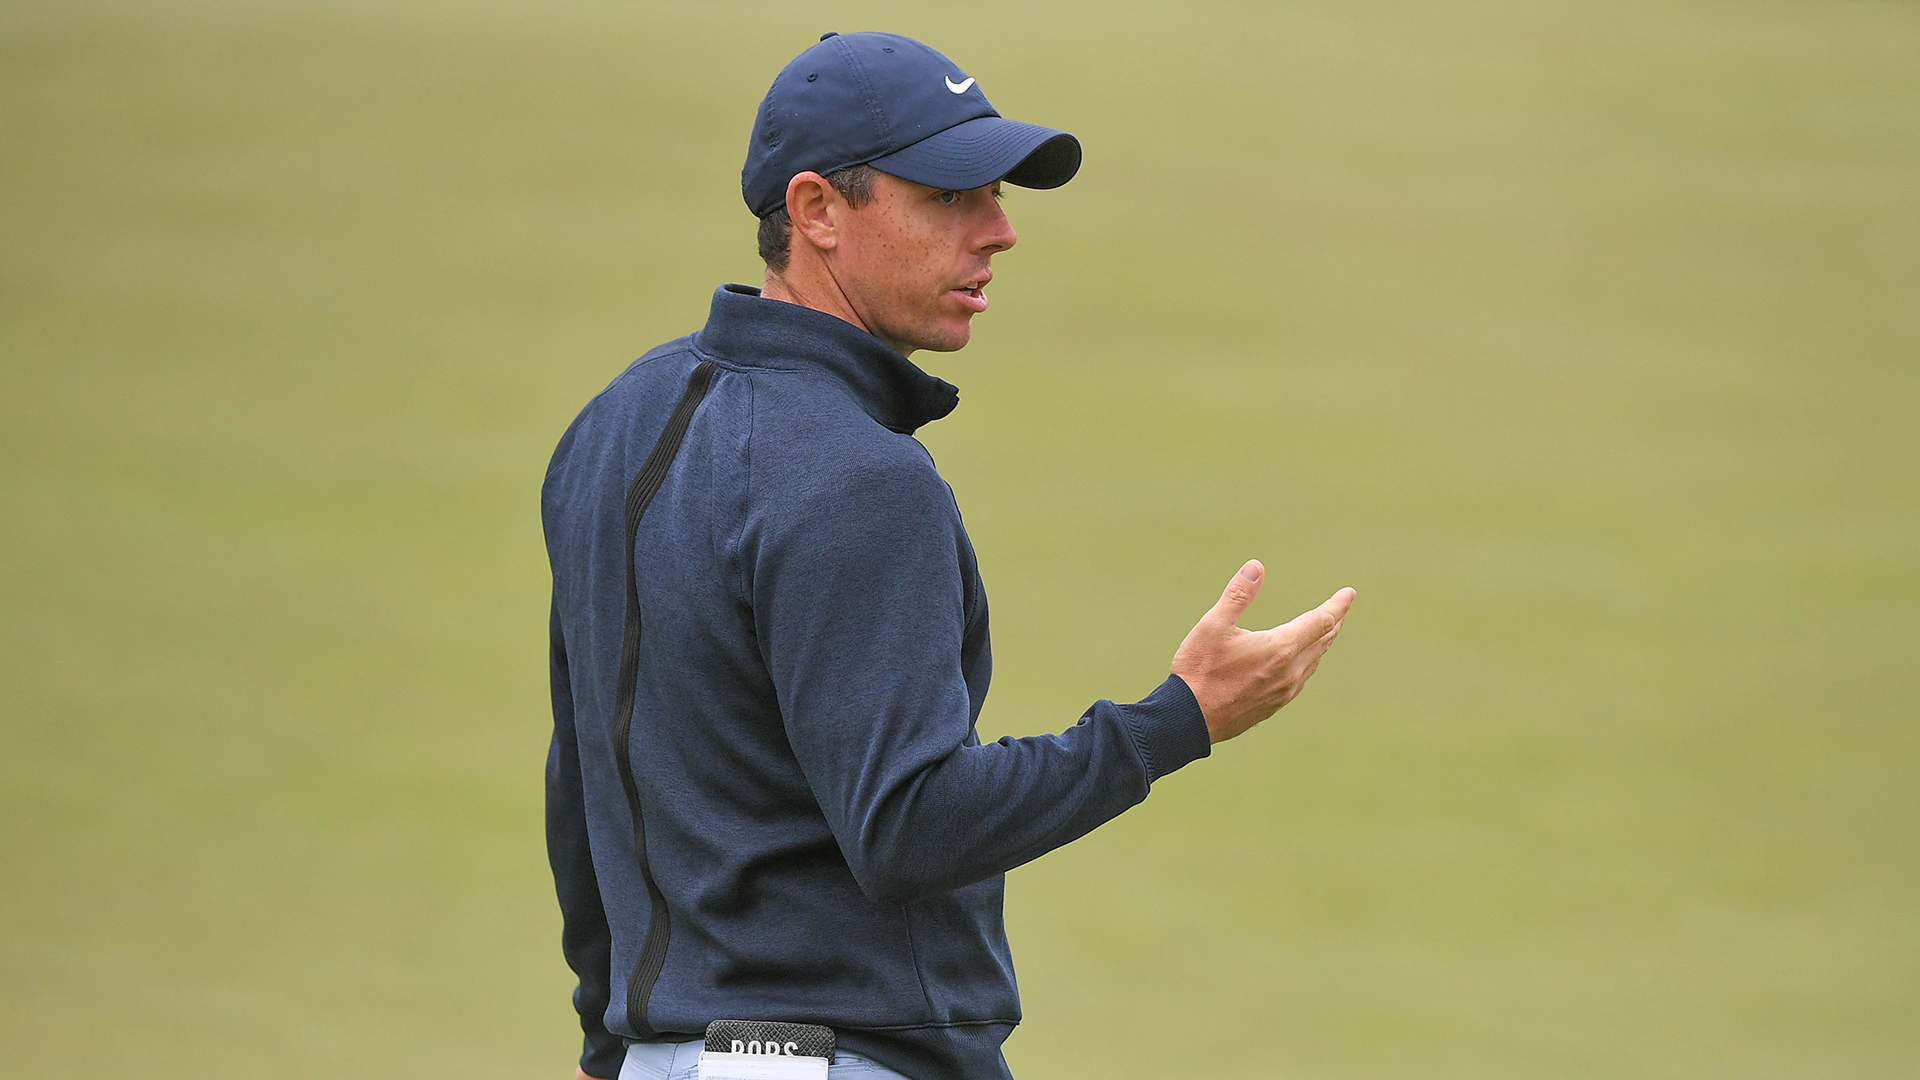 Rory McIlroy on Tom Weiskopf’s criticism: ‘I try my heart out on every single shot’